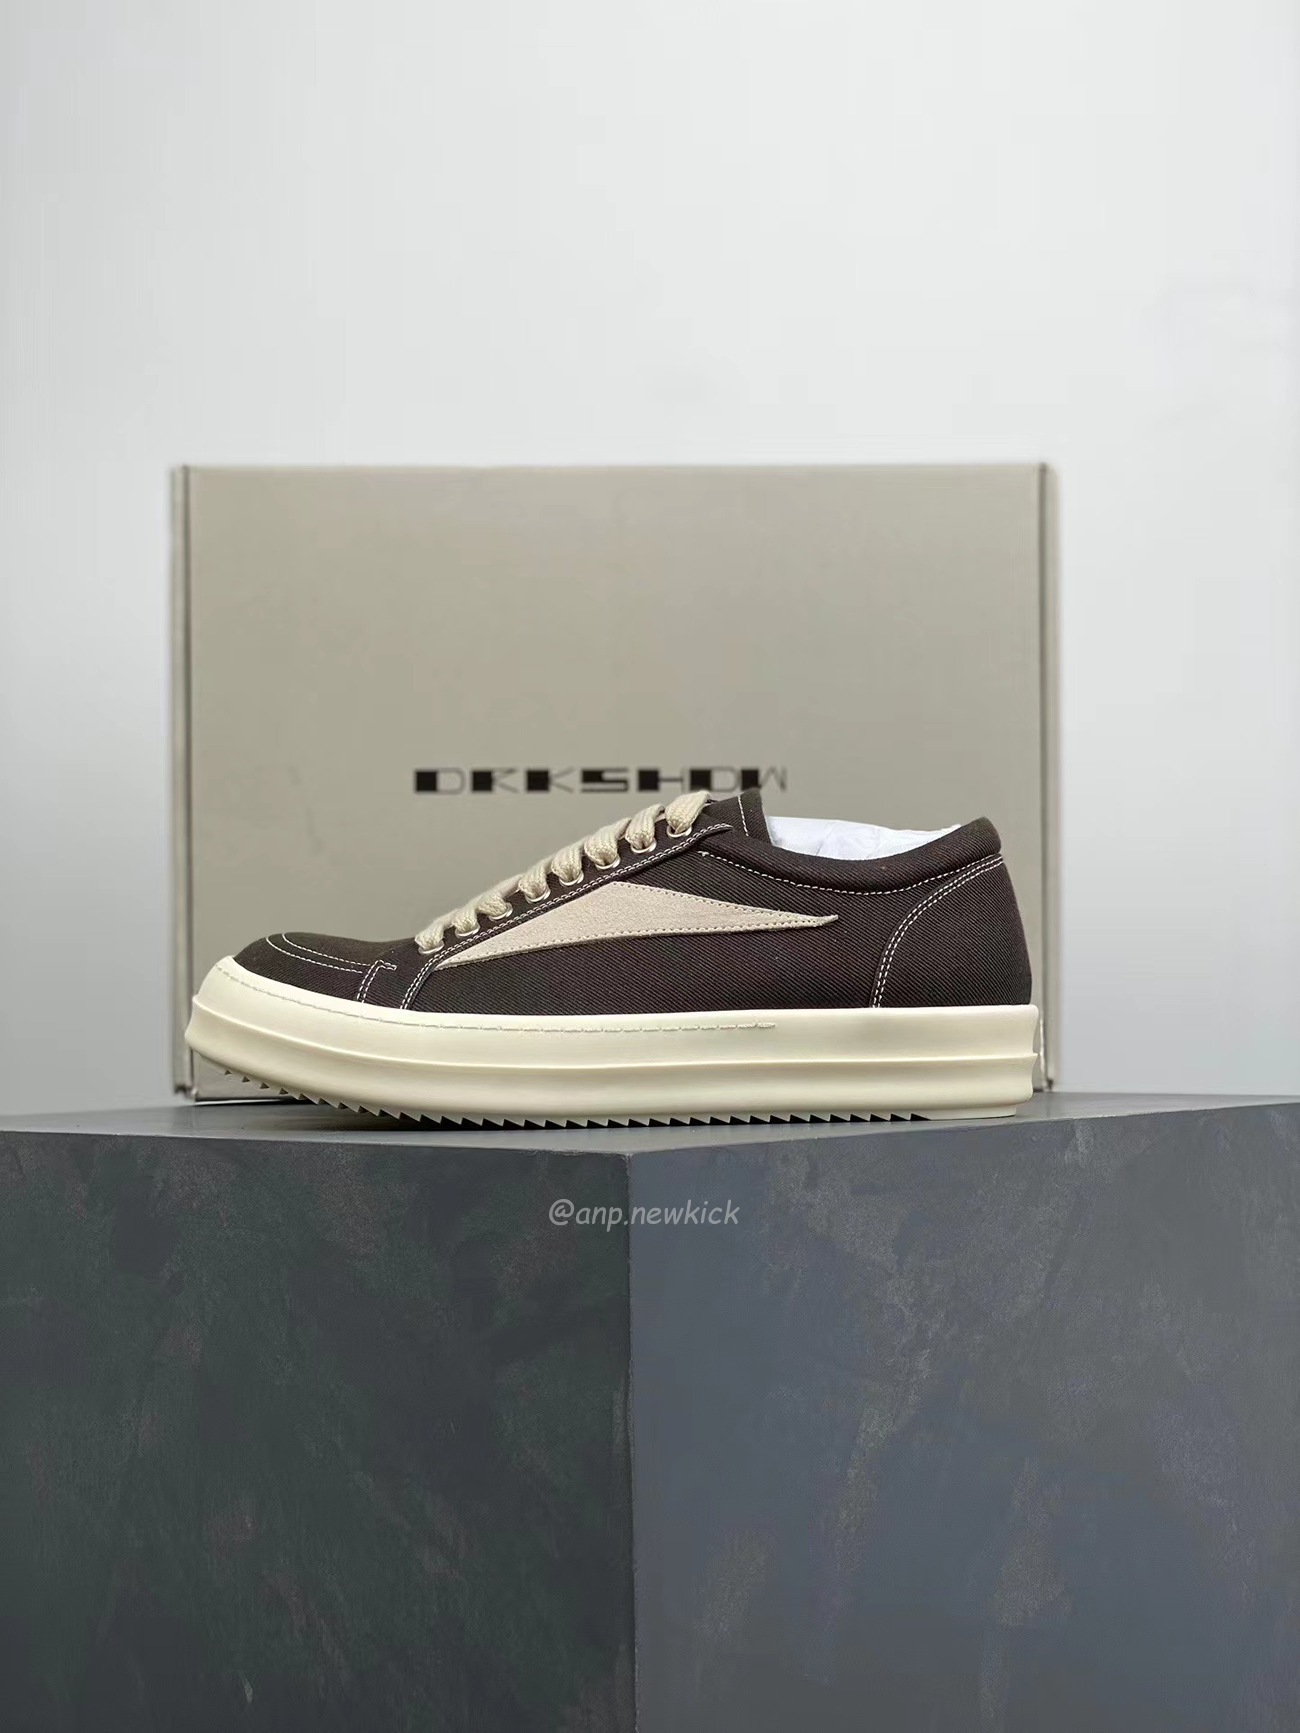 Rick Owens Leather Low Top Vintage Sneakers Suede Canvas Black Taupe Grey Faded Pnk Pearl Milk Dark Dust (12) - newkick.org